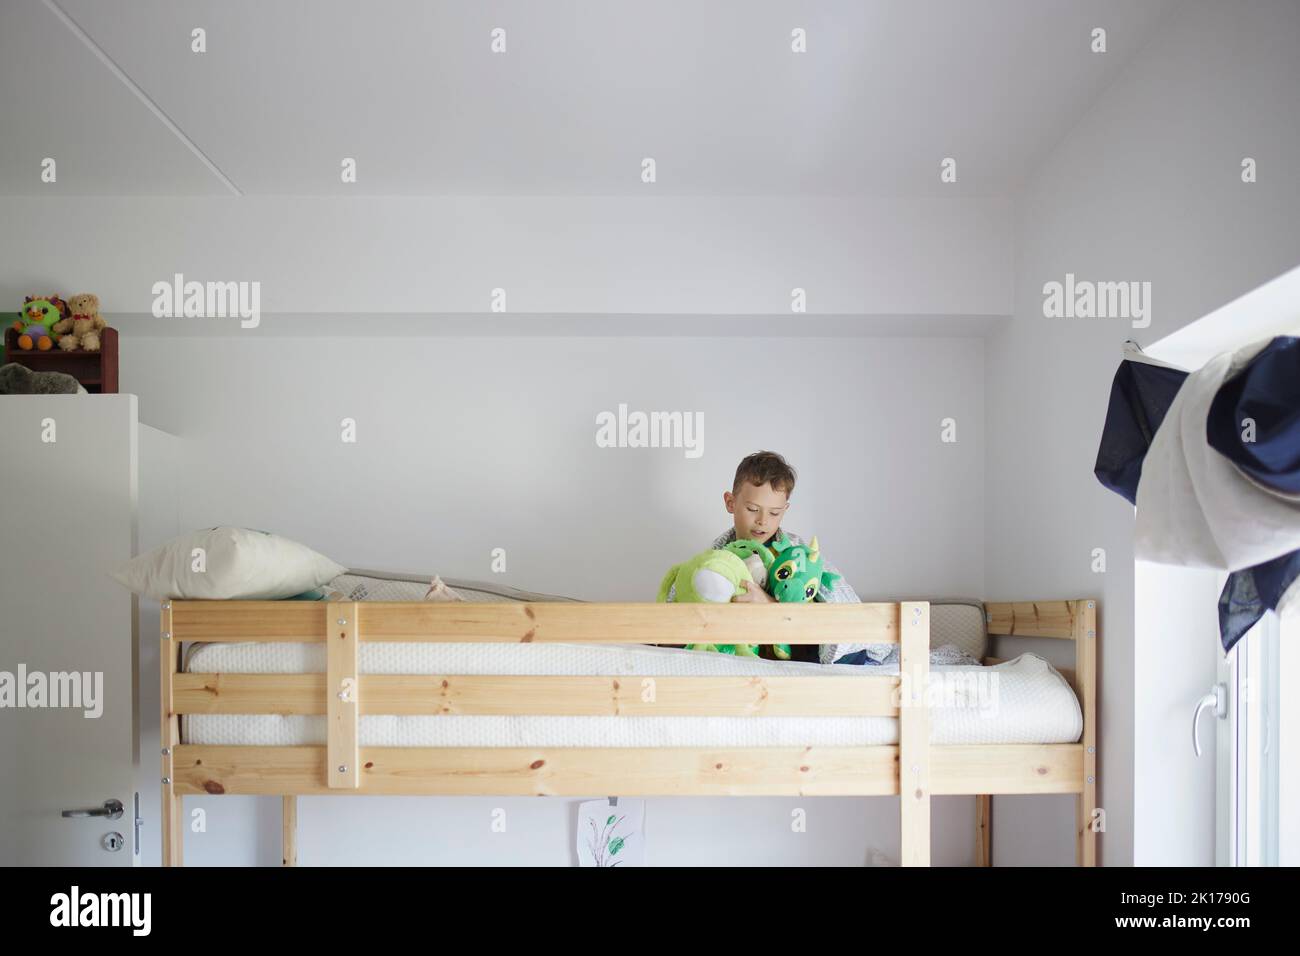 Boy playing in bunk bed Stock Photo